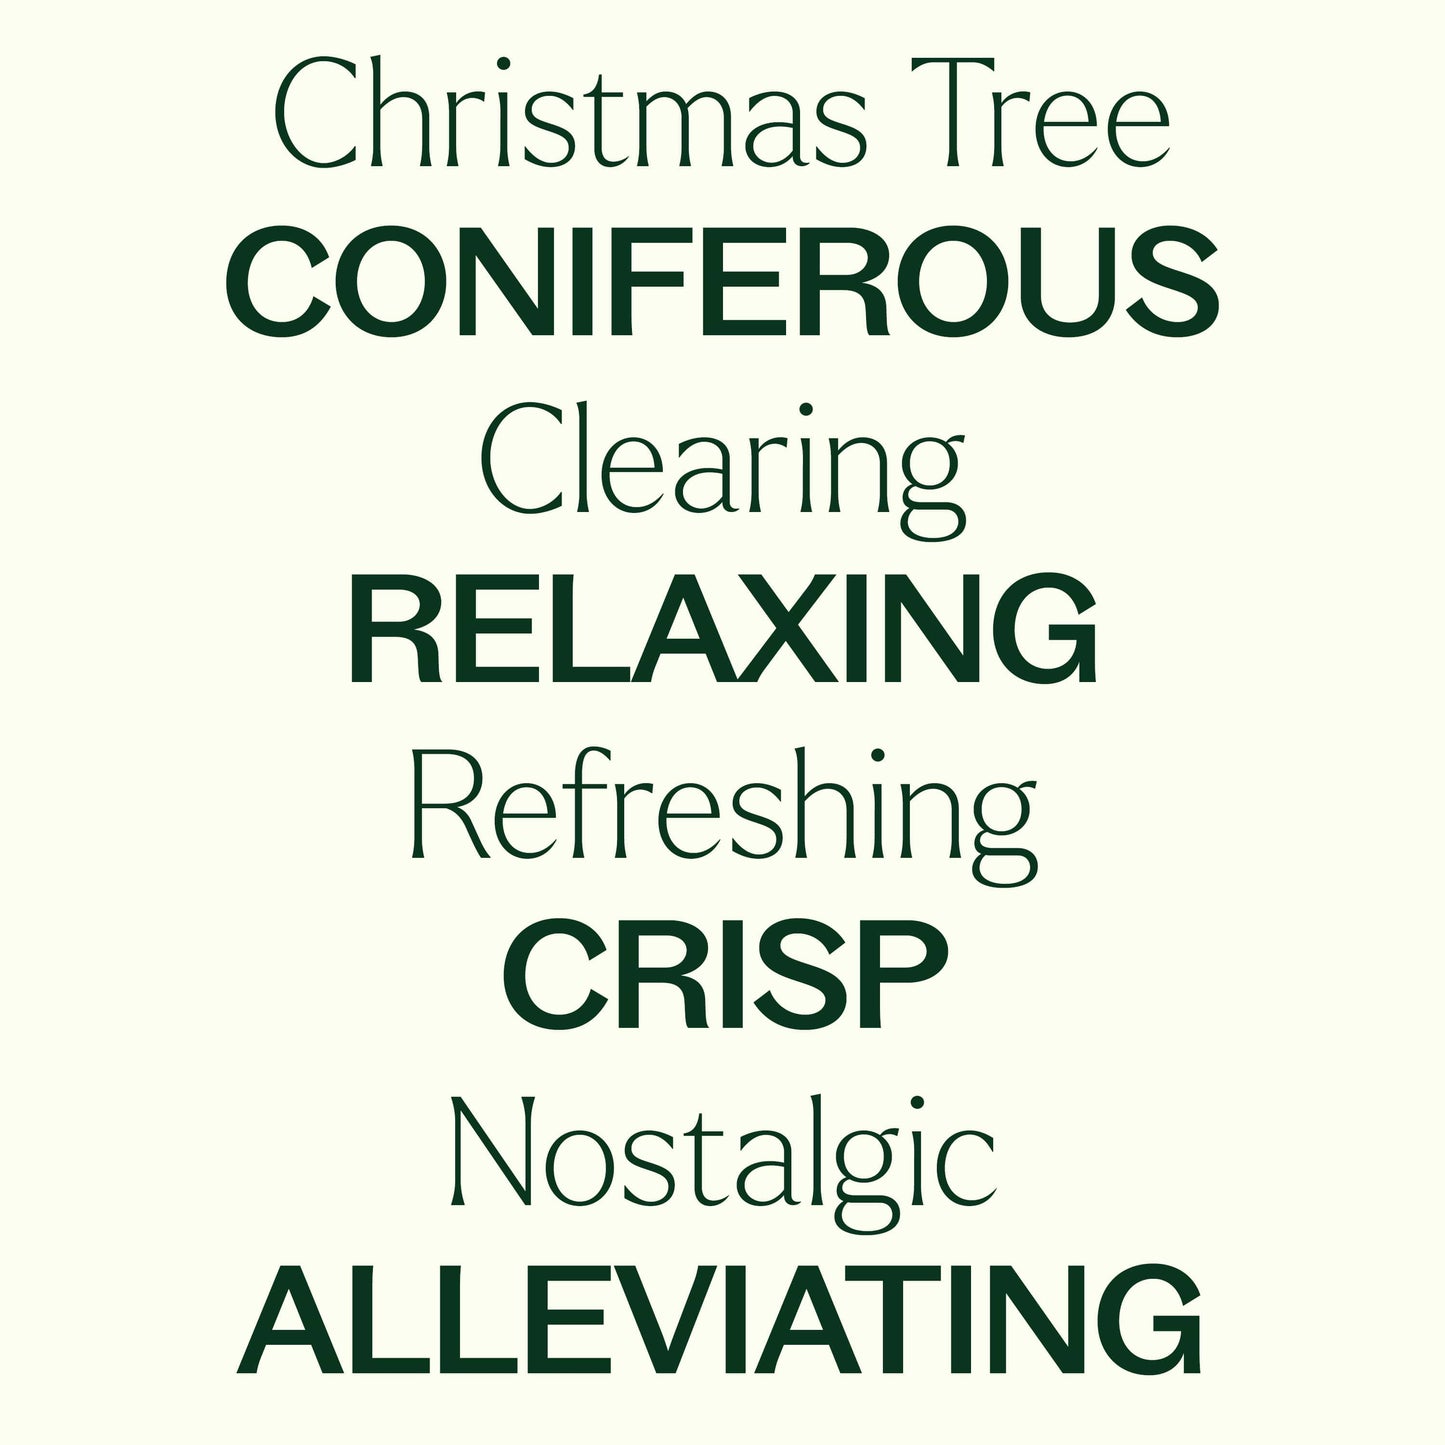 Christmas Tree Essential Oil Blend is coniferous, relaxing, crisp, refreshing, nostalgic, alleviating.